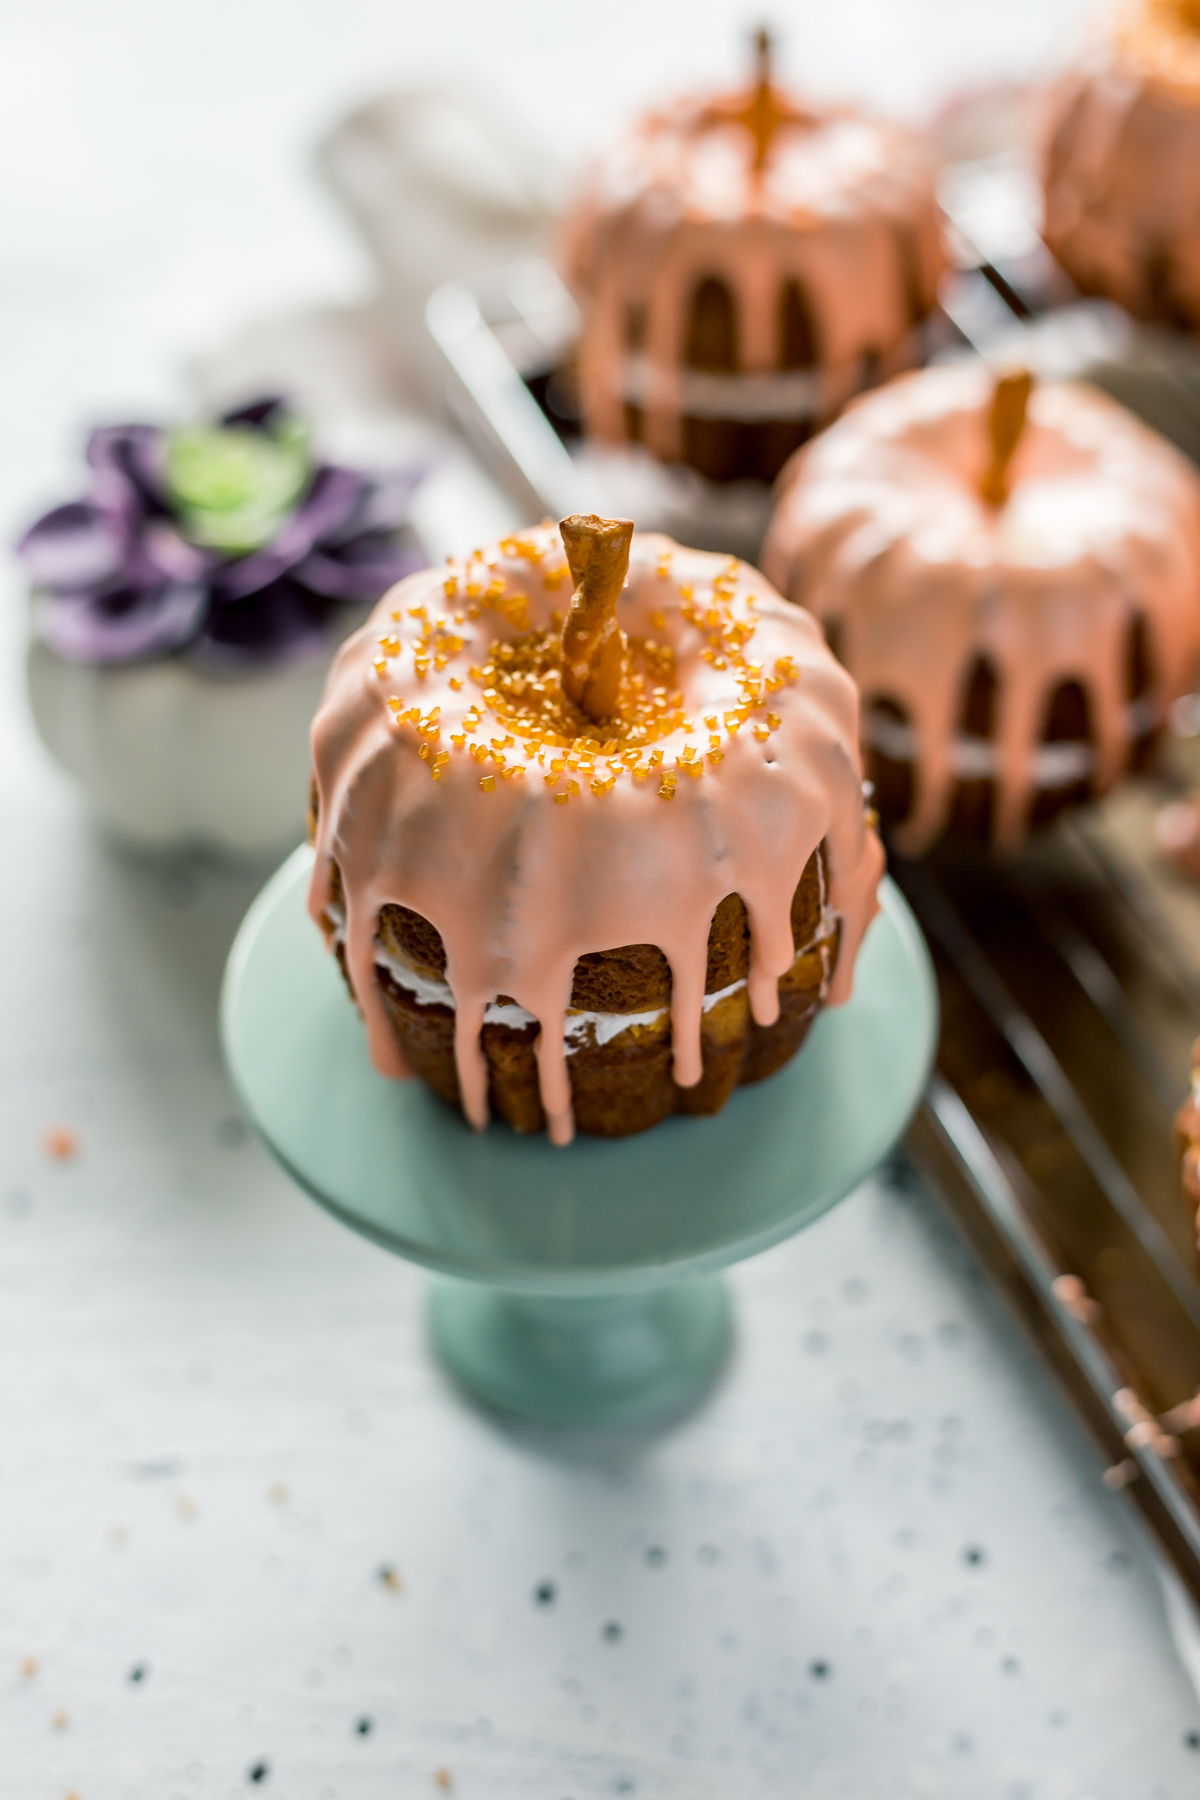 Mini Pumpkin Bundt Cakes with Cheesecake Filling